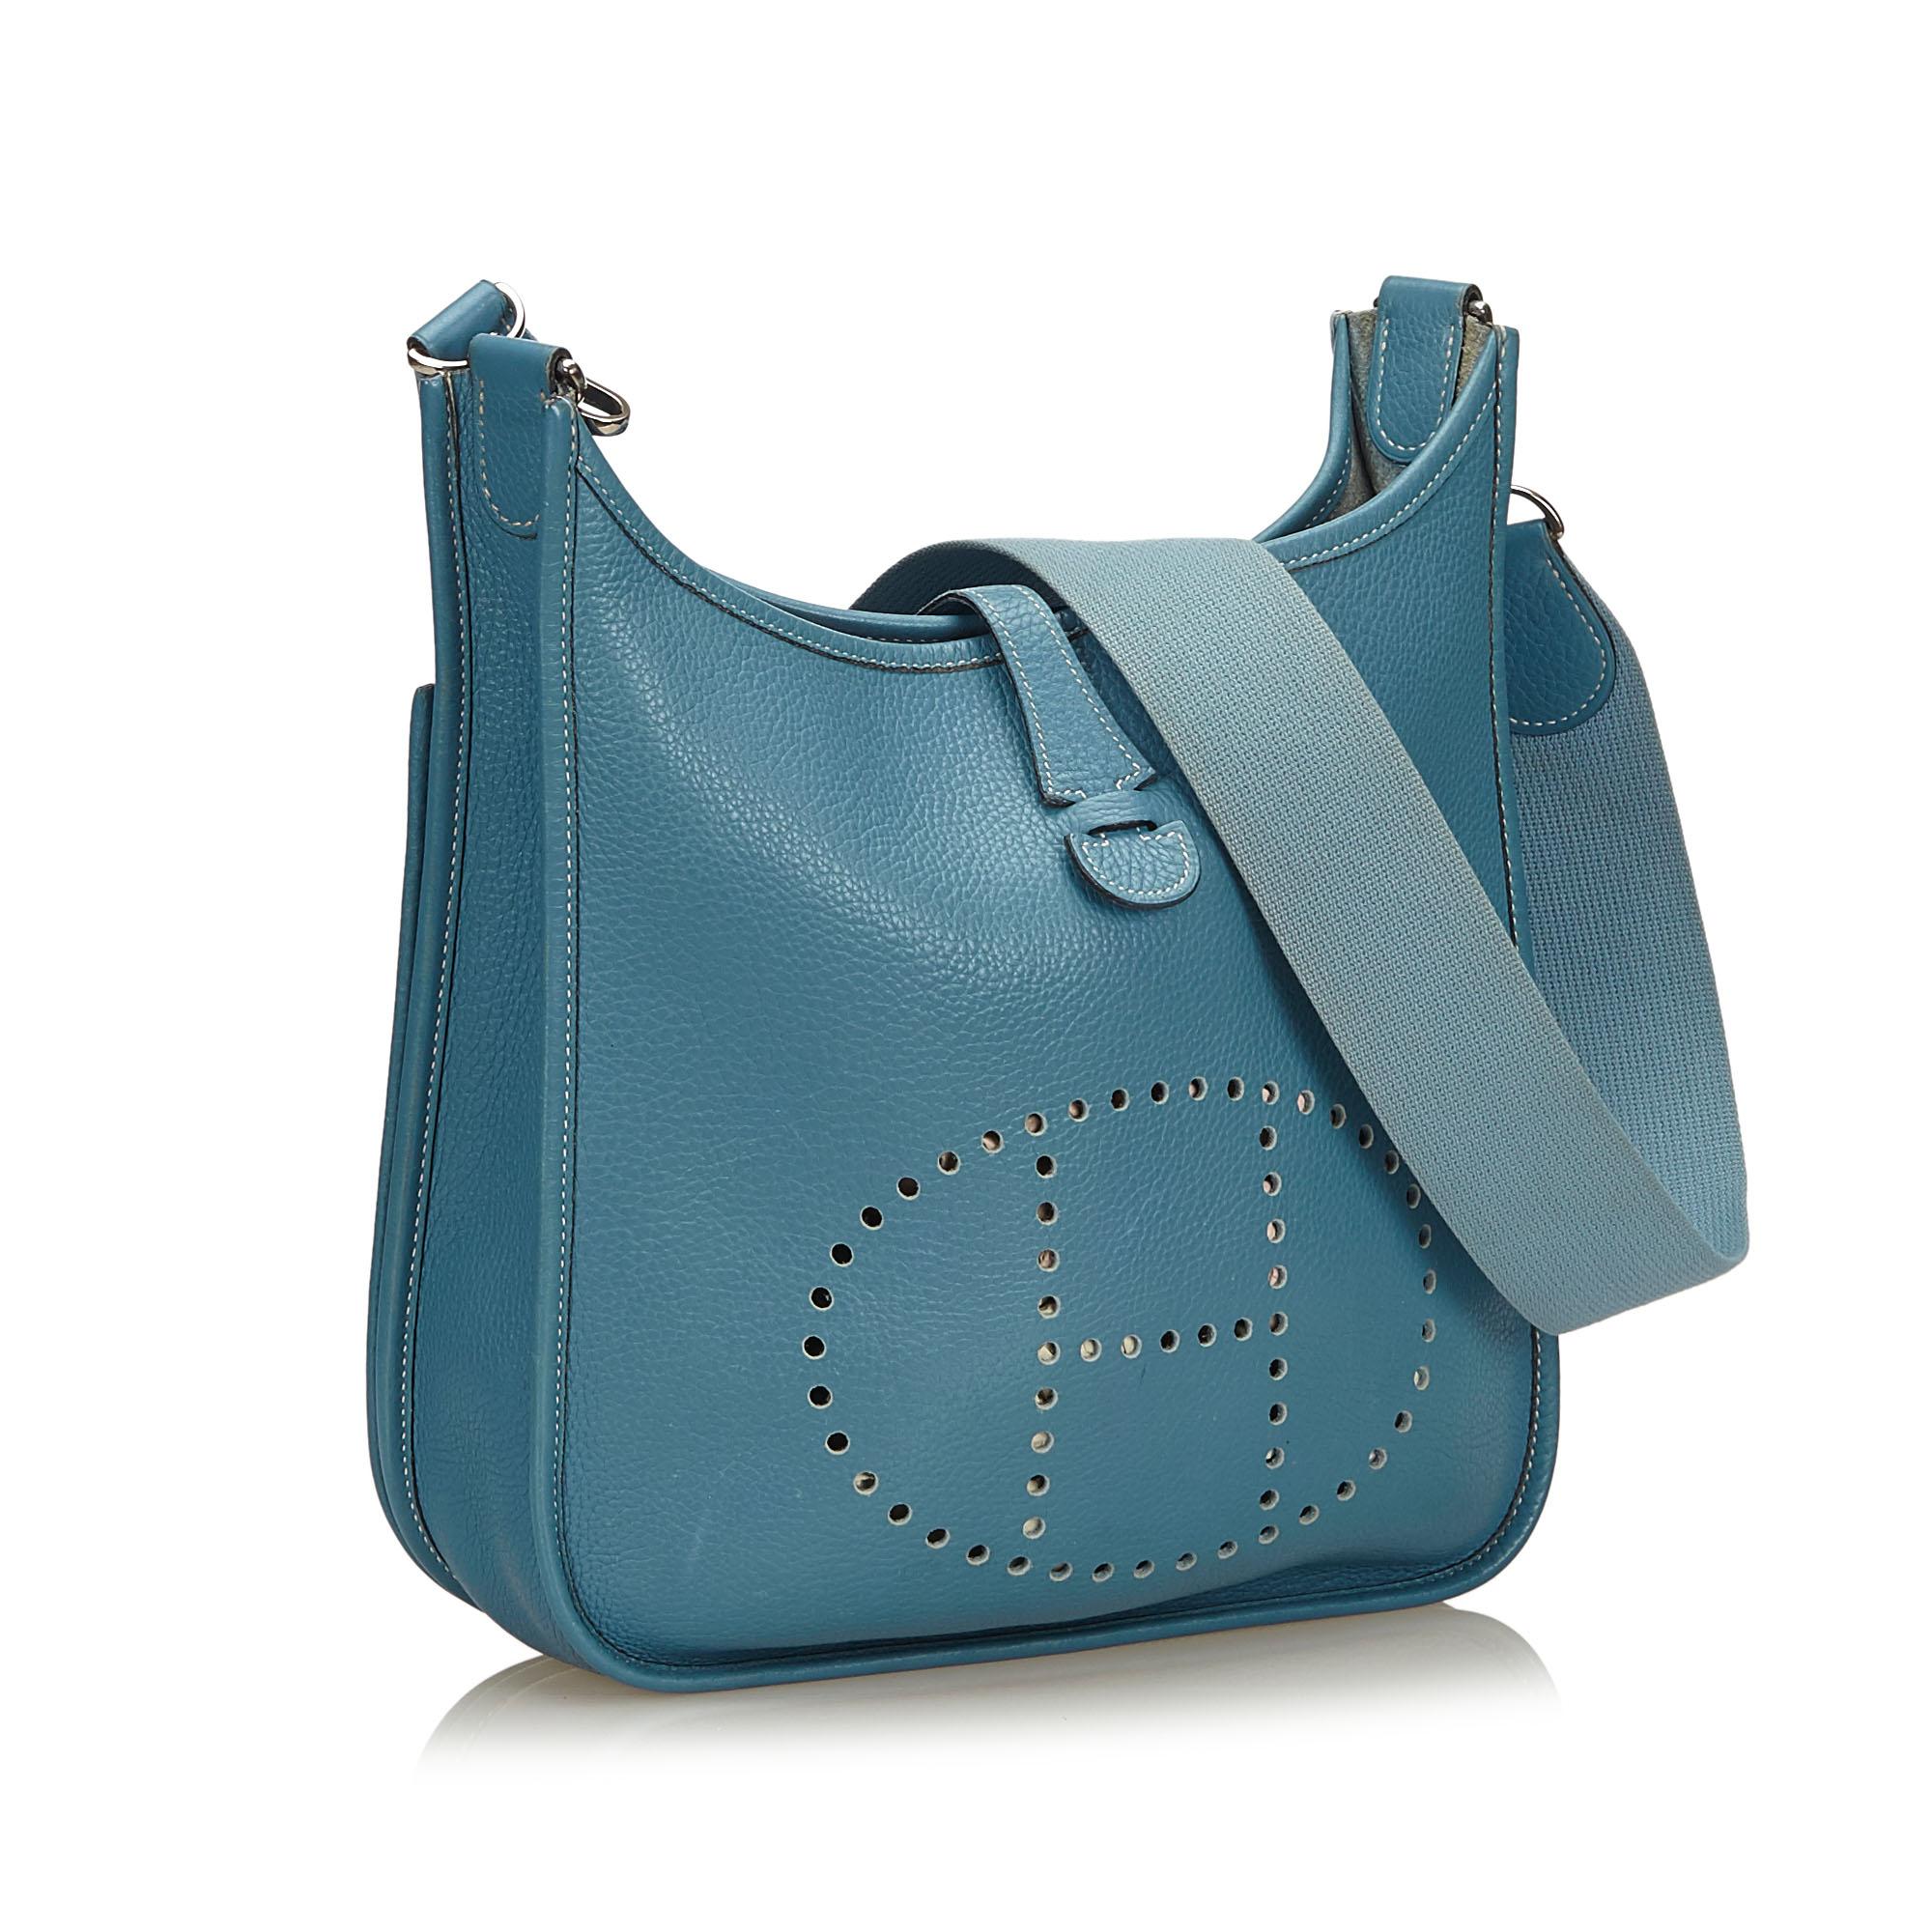 The Evelyne PM features a leather body, a detachable flat leather strap, a top strap closure, and an exterior slip pocket.

It carries a AB condition rating.

Dimensions: 
Length 27 cm
Width 28 cm
Depth 9 cm
Shoulder Drop 49 

Inclusions: No longer